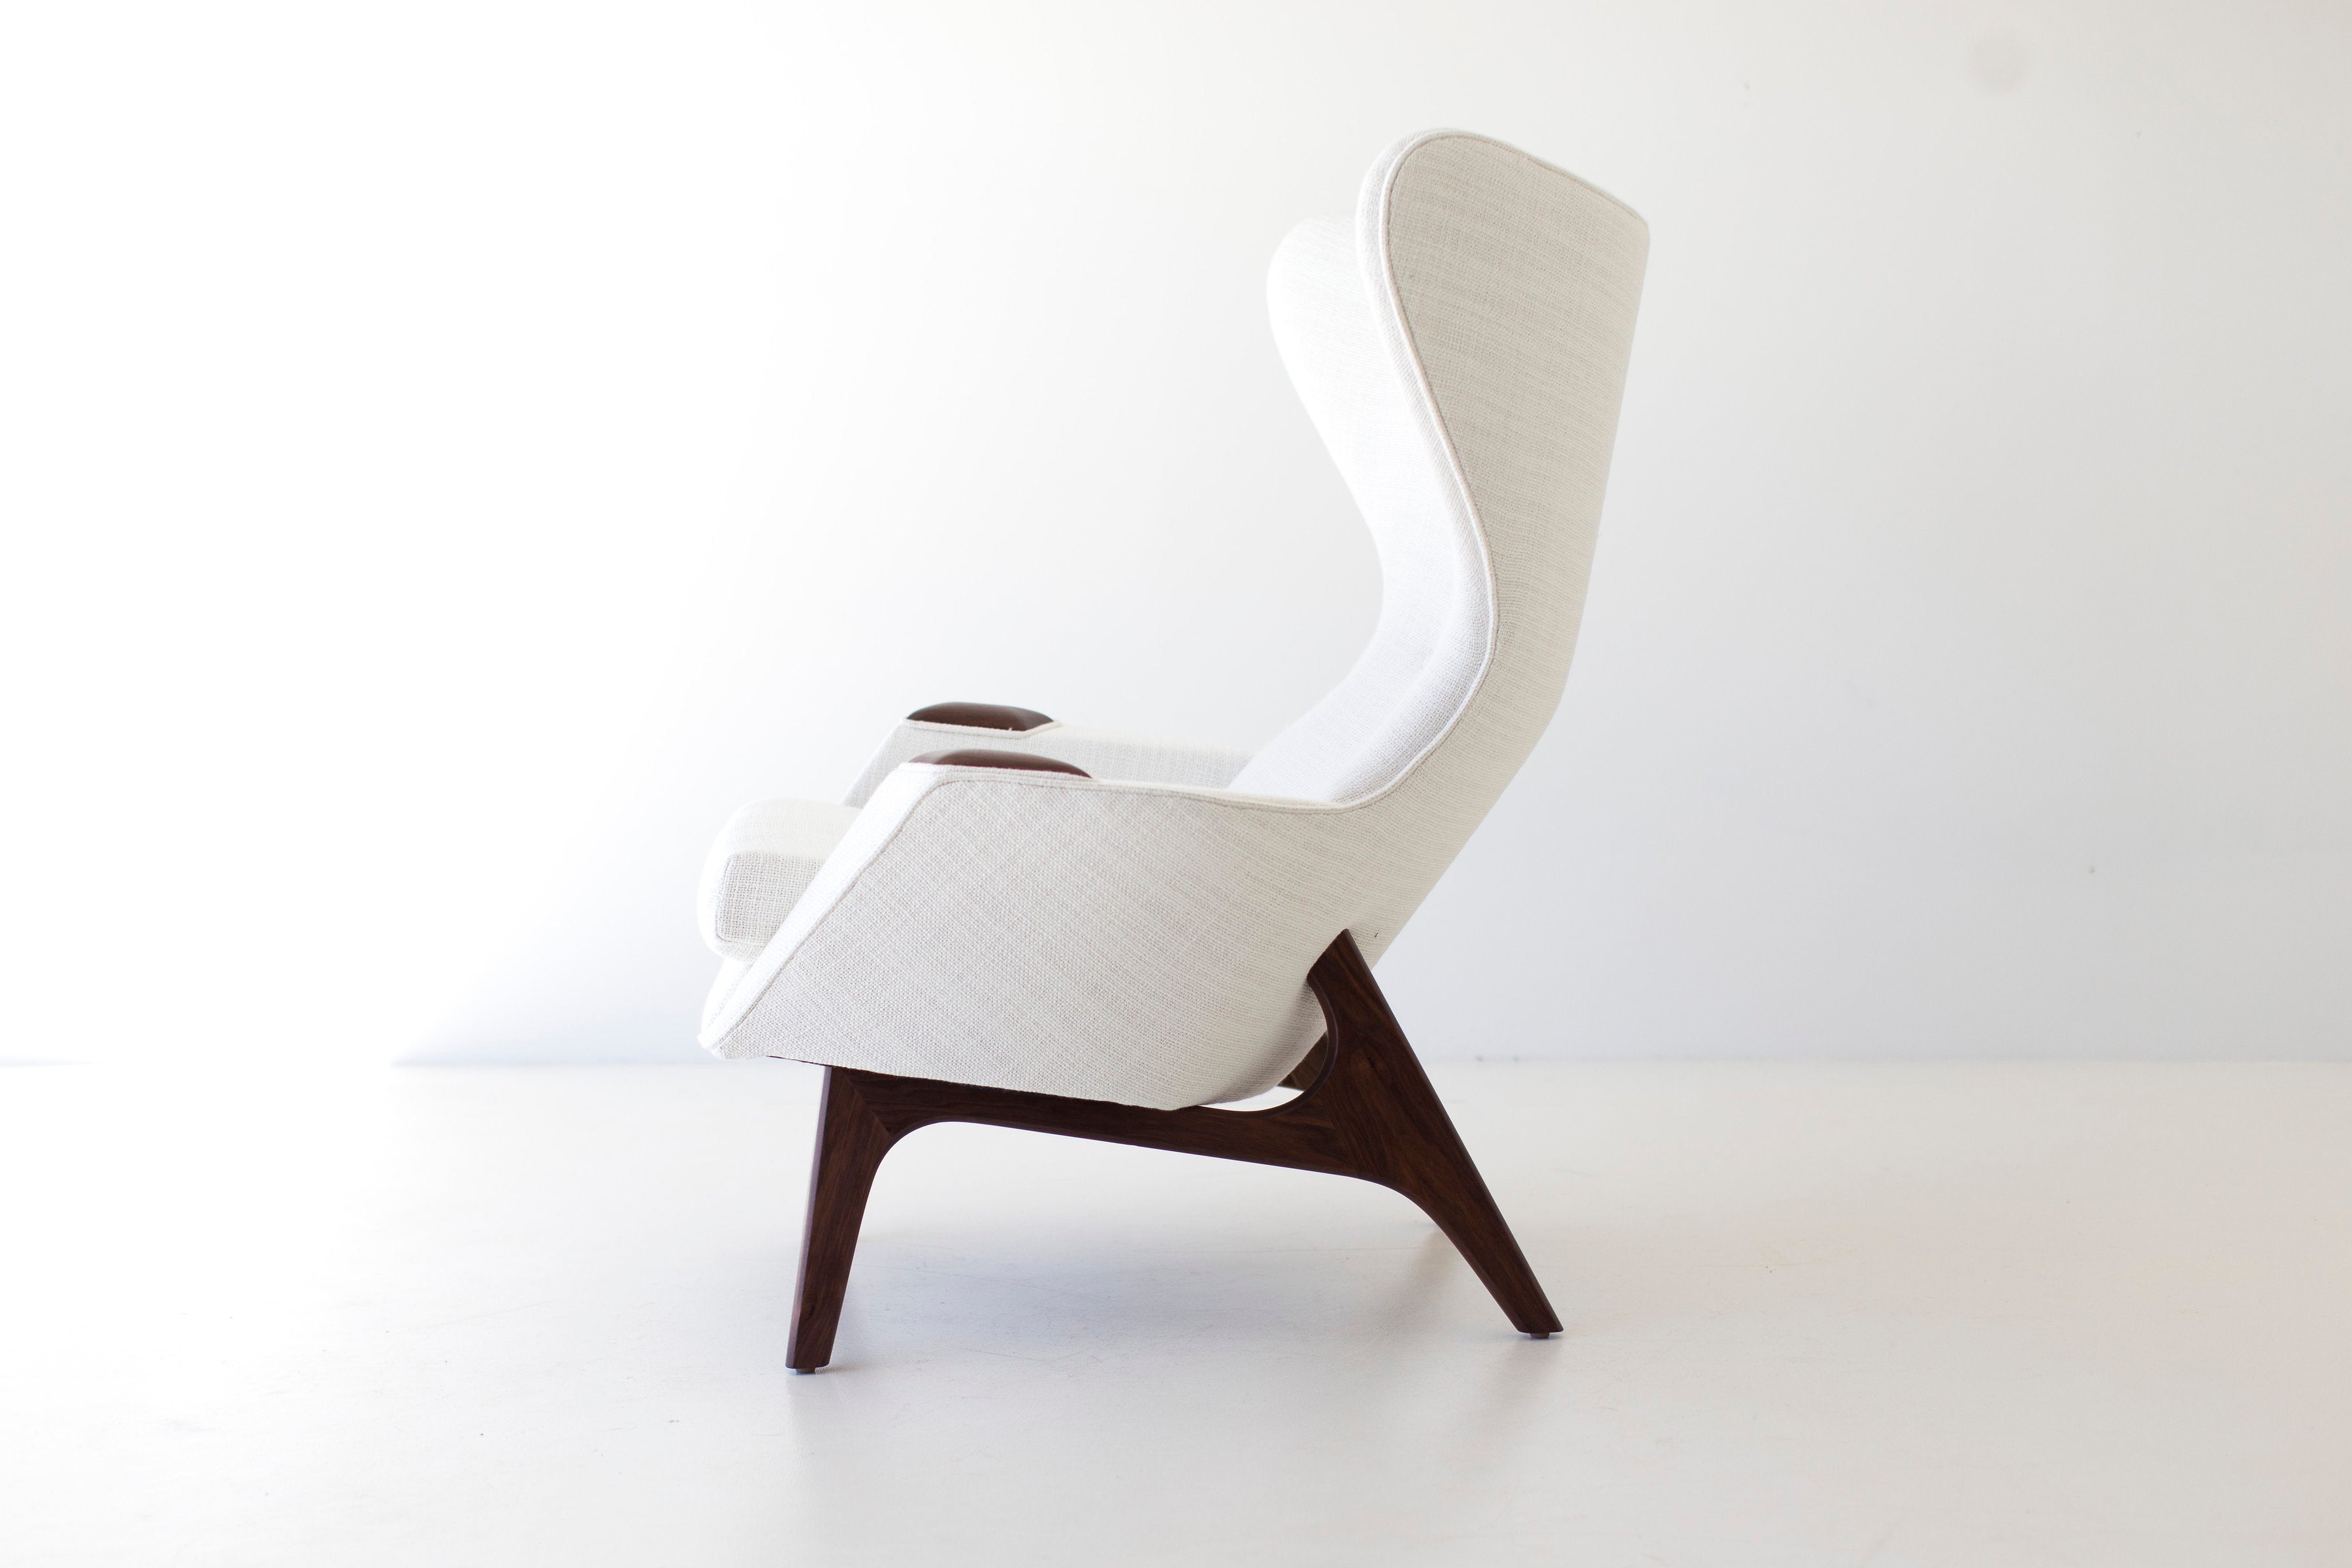 Craft Associates® Modern Wing Chairs in white - 1407